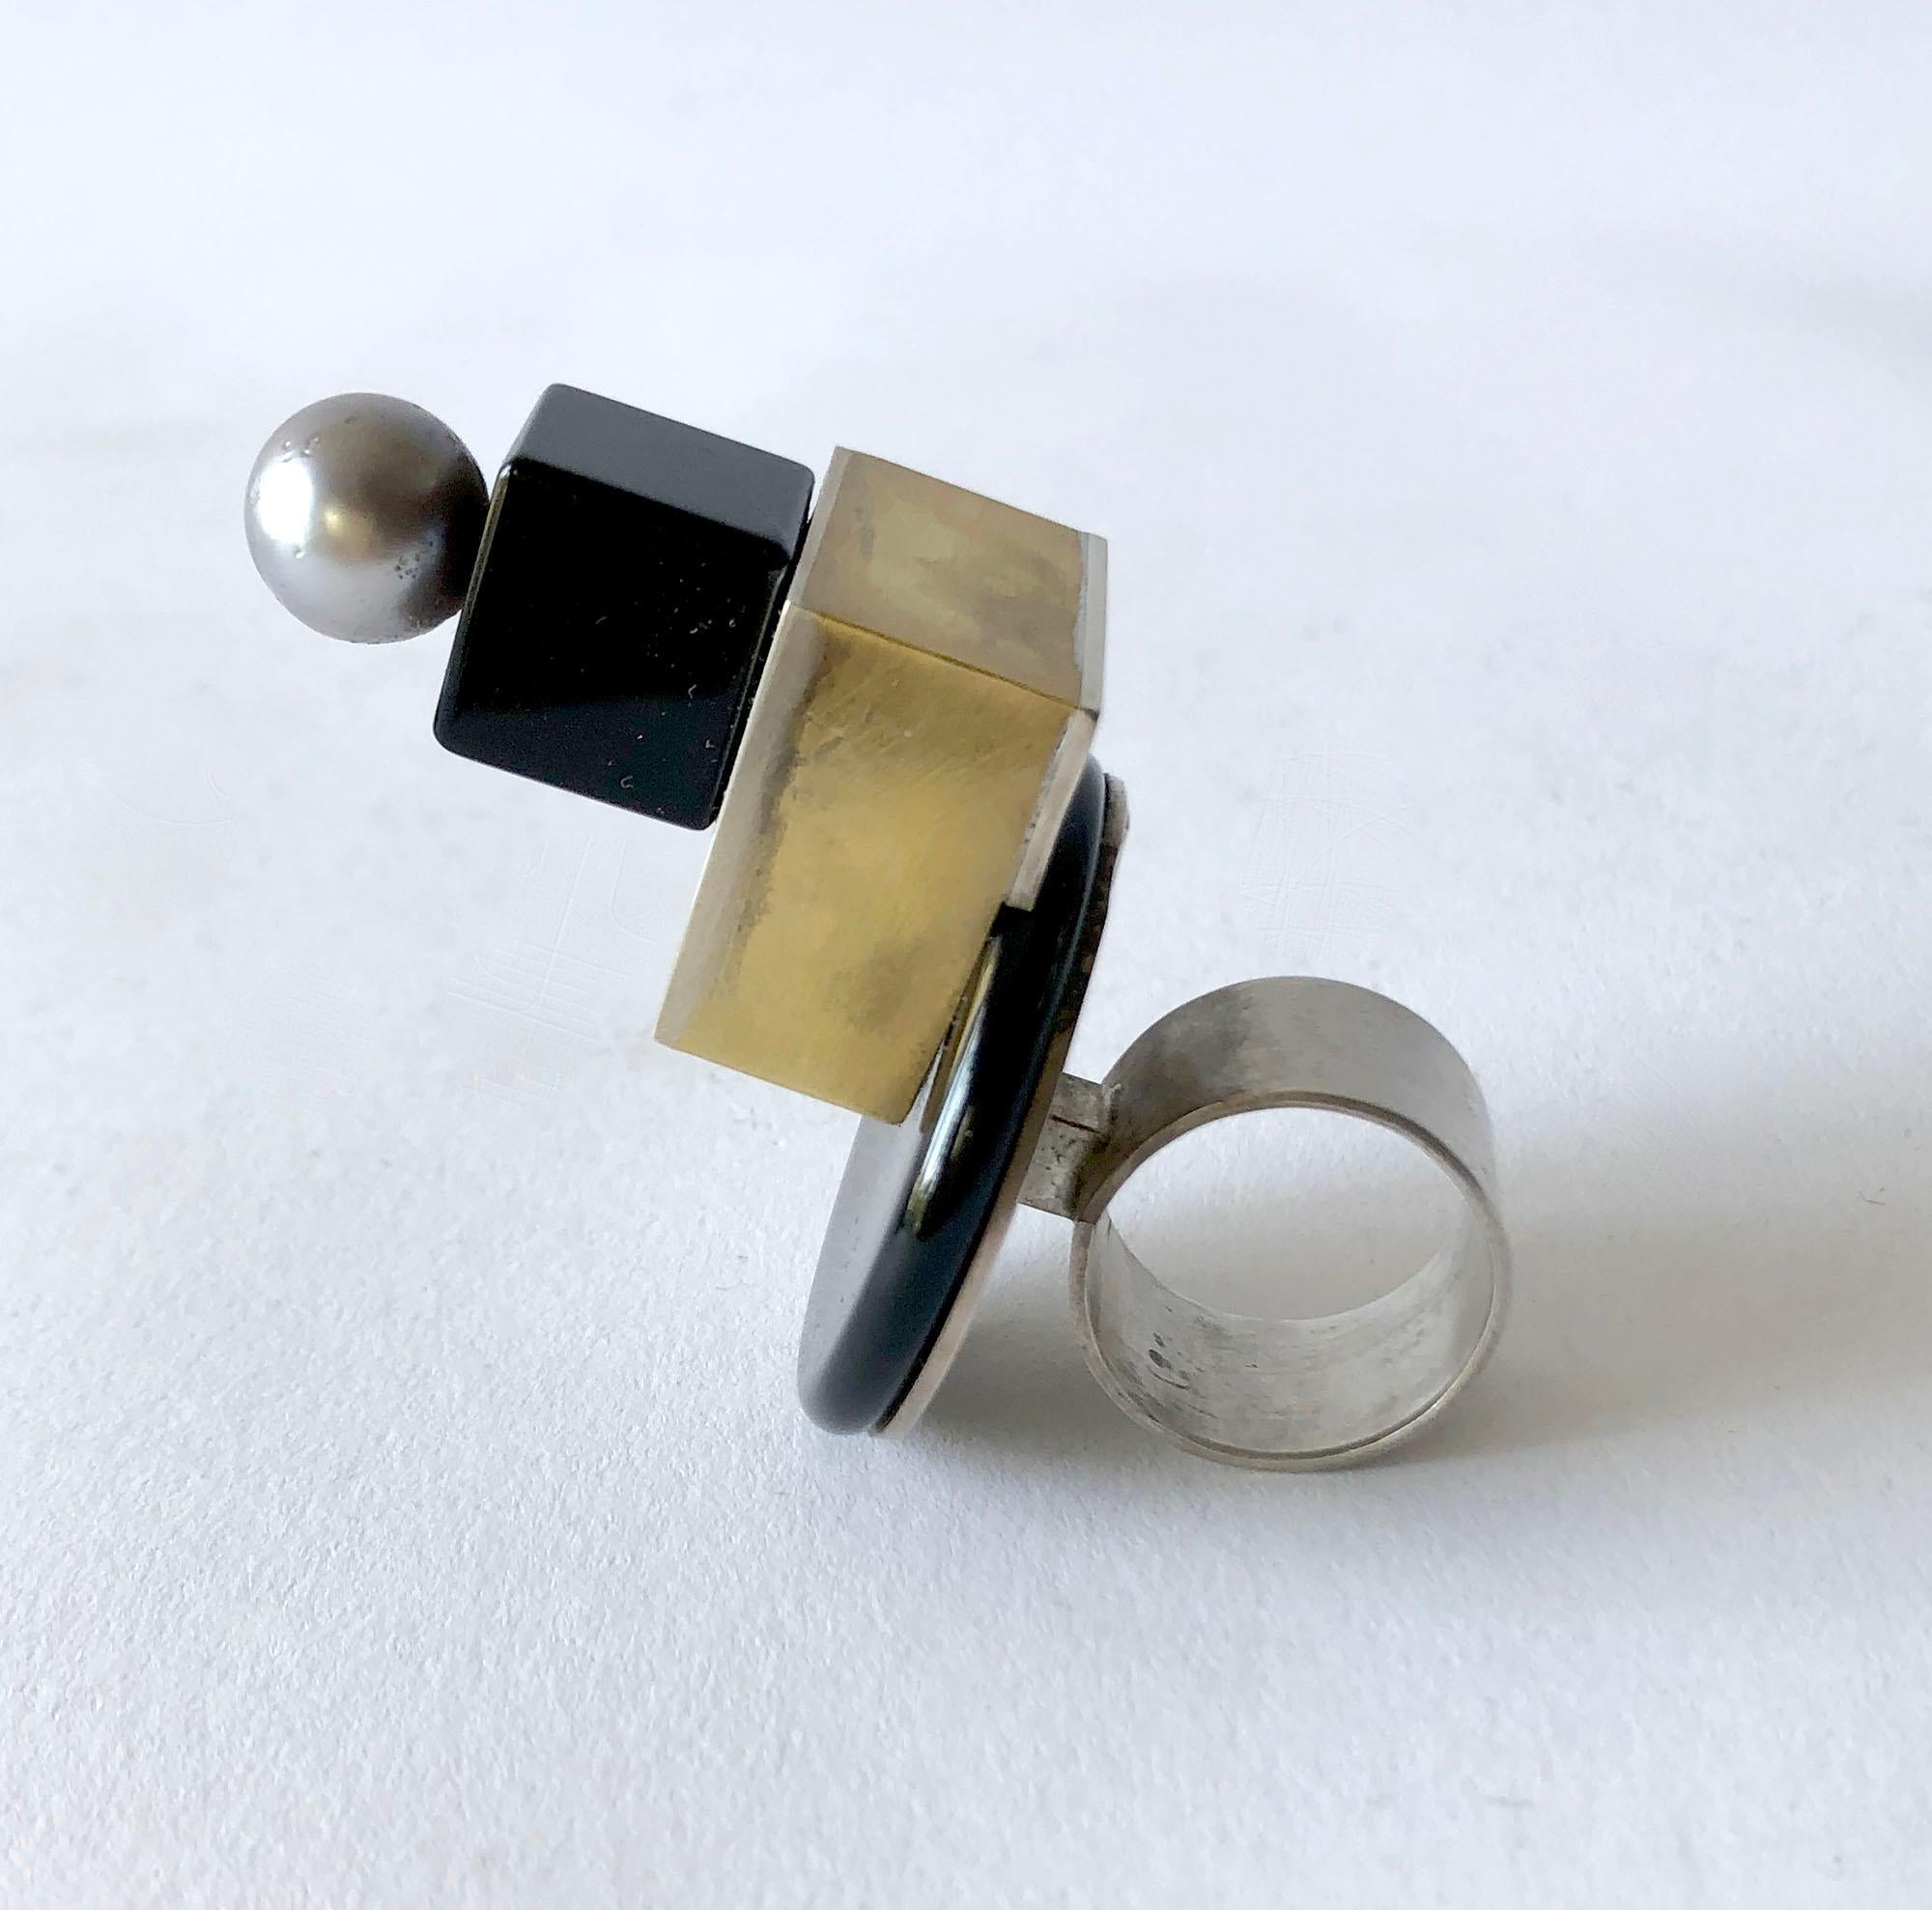 Sterling silver and brass architectural ring with onyx disc and cube, topped off by a Tahitian pearl created by Heidi Abrahamson of Phoenix, Arizona. Ring is a finger size 7.75 - 8 and stands 2